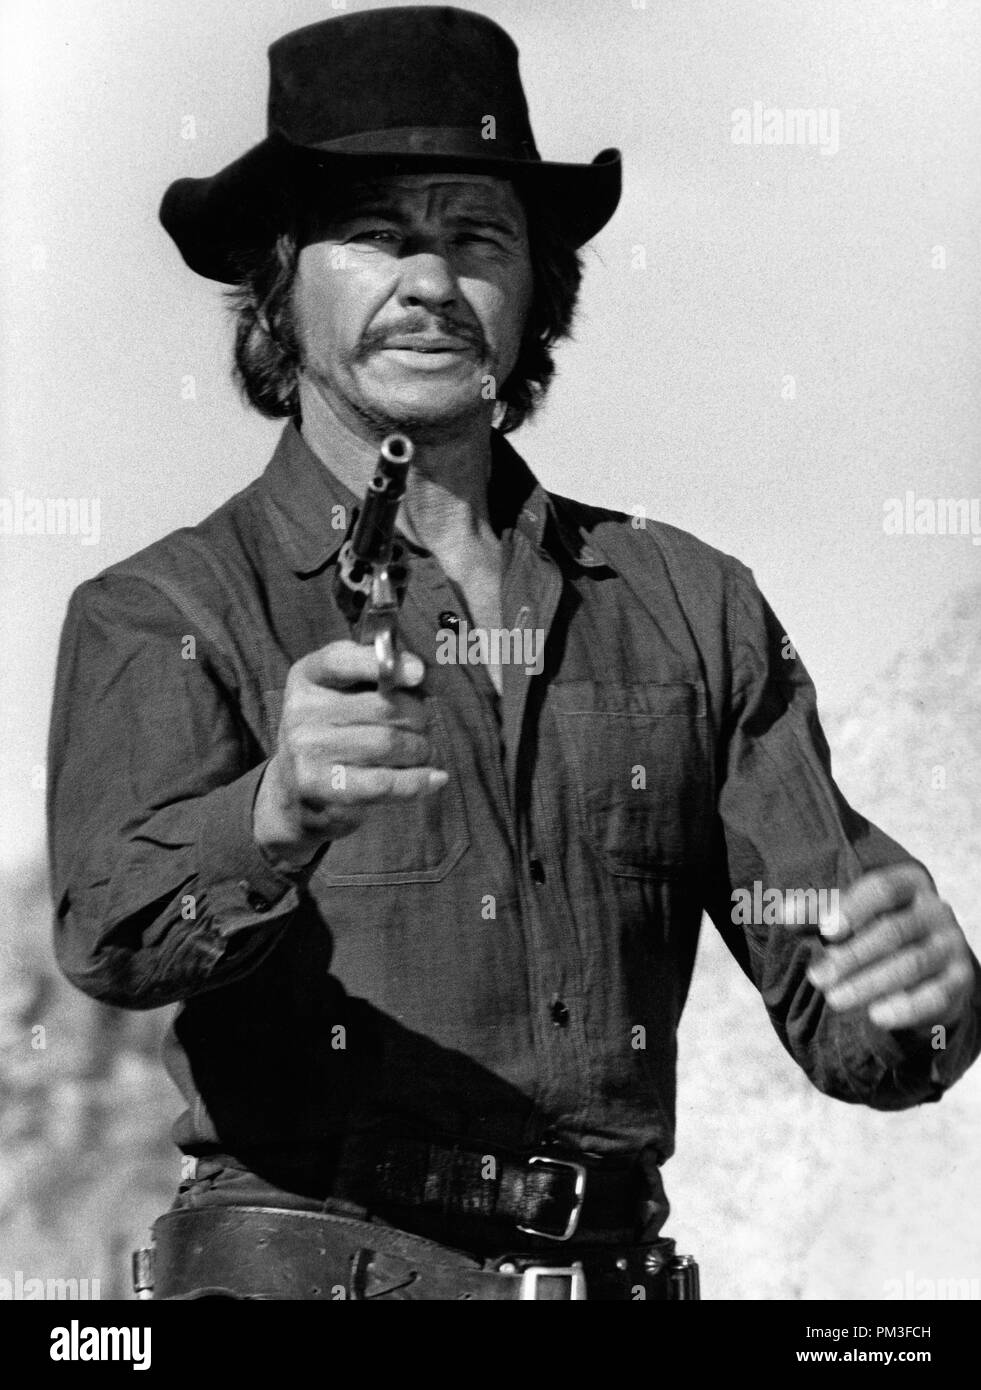 Studio Publicity Still: 'Red Sun' (AKA 'Soleil rouge')   Charles Bronson   1971 National General Pictures     File Reference # 30732 1053THA Stock Photo